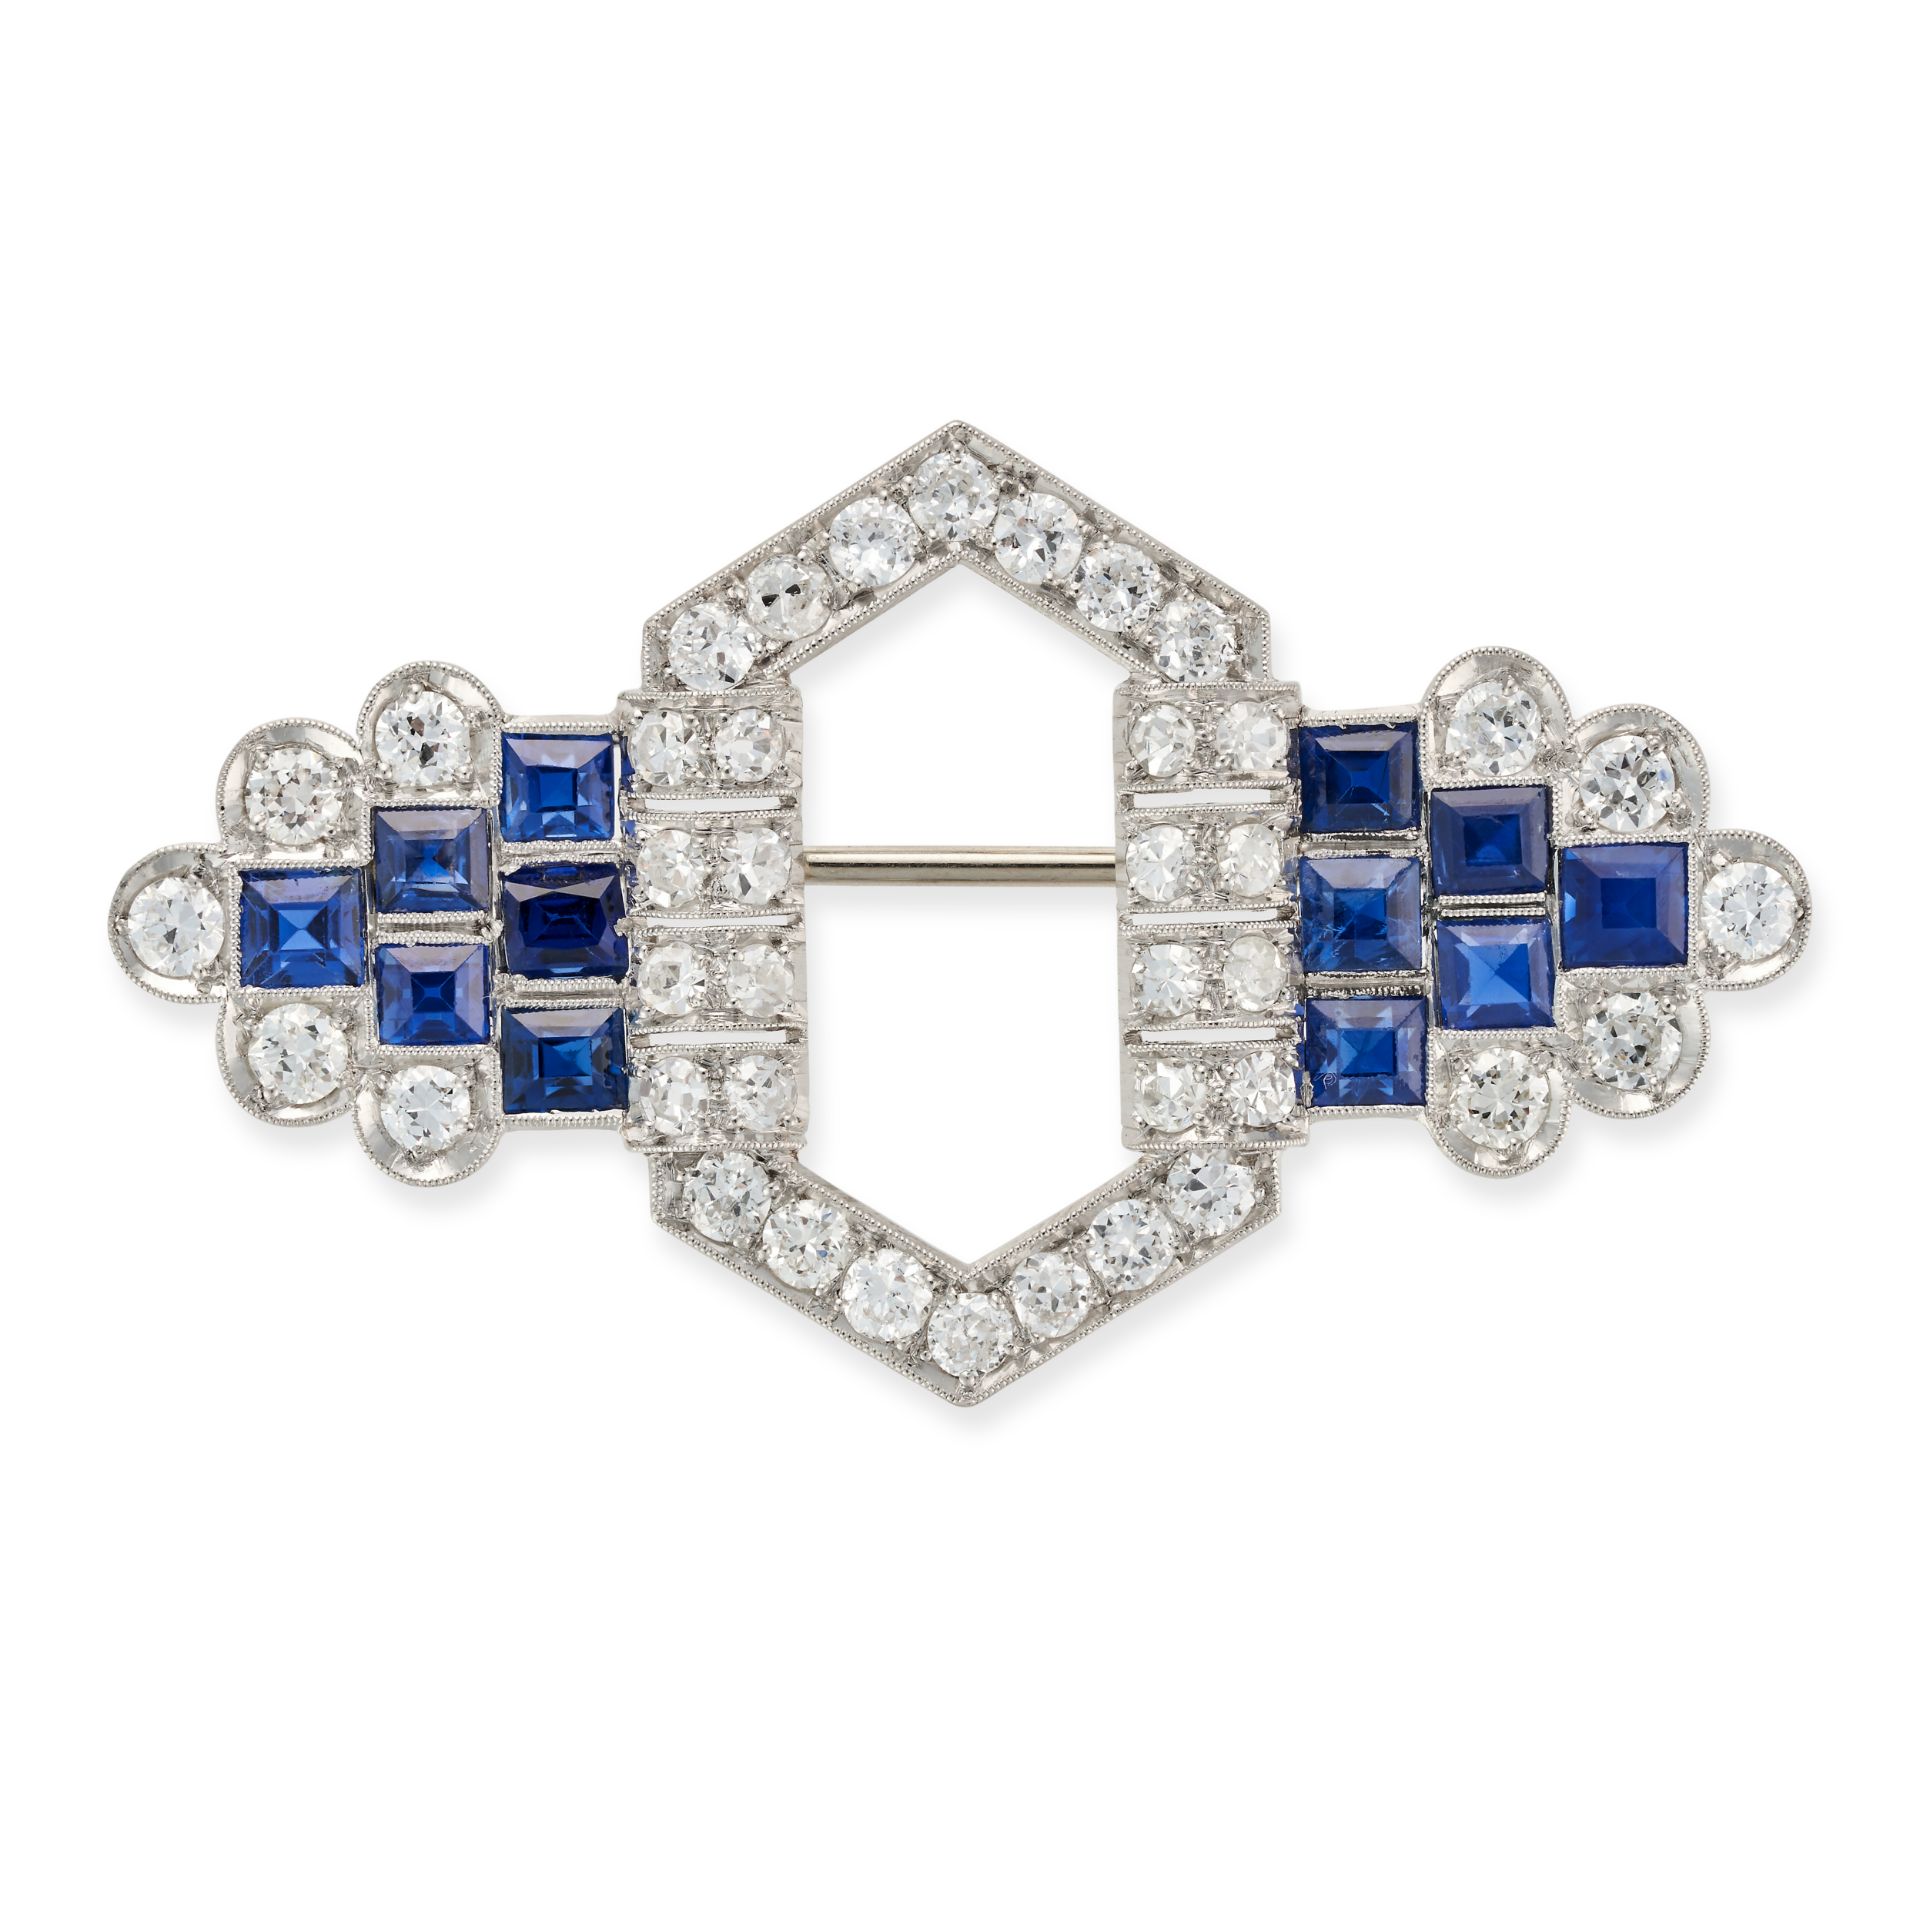 AN ART DECO SAPPHIRE AND DIAMOND BROOCH the geometric brooch set with old European and single cut...